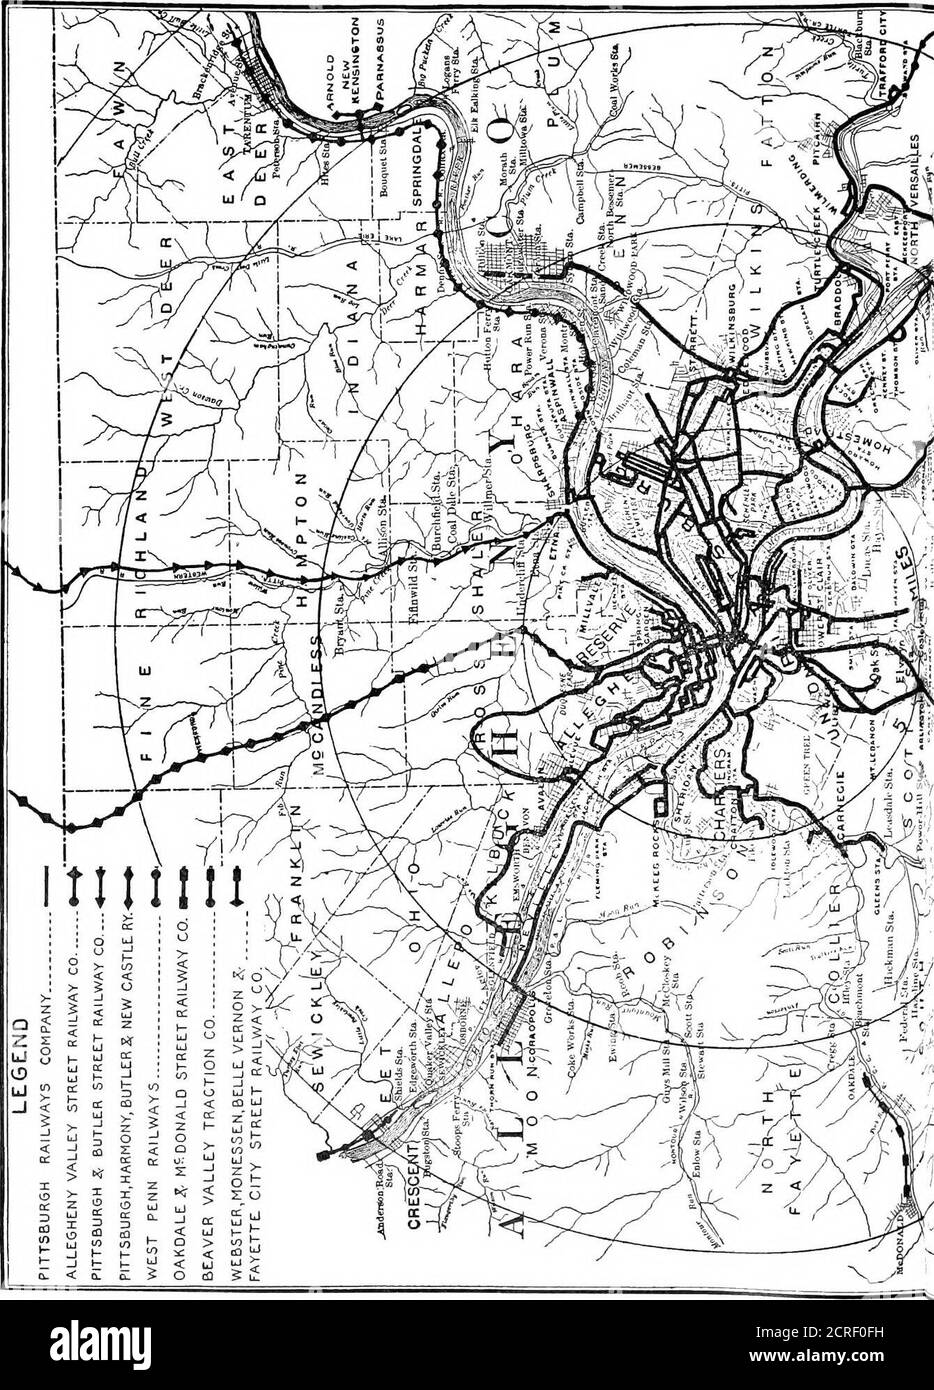 . Report on the Pittsburgh transportation problem, submitted to Honorable William A. Magee, mayor of the city of Pittsburgh . CTION CASTLE SHANNON COMPANY COMPANY COMPANY RAILROAD 1881 S 683,279 1882 746,076 1883 966,445 1884 925,920 1885 18.36 20.79 3.50 42.65 948,240 1886 19.86 22.24 3.50 45.60 911,622 1887 13.25 24.76 5.25 43.26 1,108,875 1888 13.25 28.76 5.25 6.5 53.76 1,230,101 1889 6.5 1890 12.21 39.47 5.25 63.43 1,570,214 1891 19.11 58.90 5.25 6.5 89.76 2,034,809 1892 45.40 70.86 5.25 6.5 128.01 2,515,848 1893 43.40 76.34 12.90 6.5 139.14 2,861,535 1894 73.98 73.05 24.44 6.5 177.97 2,68 Stock Photo